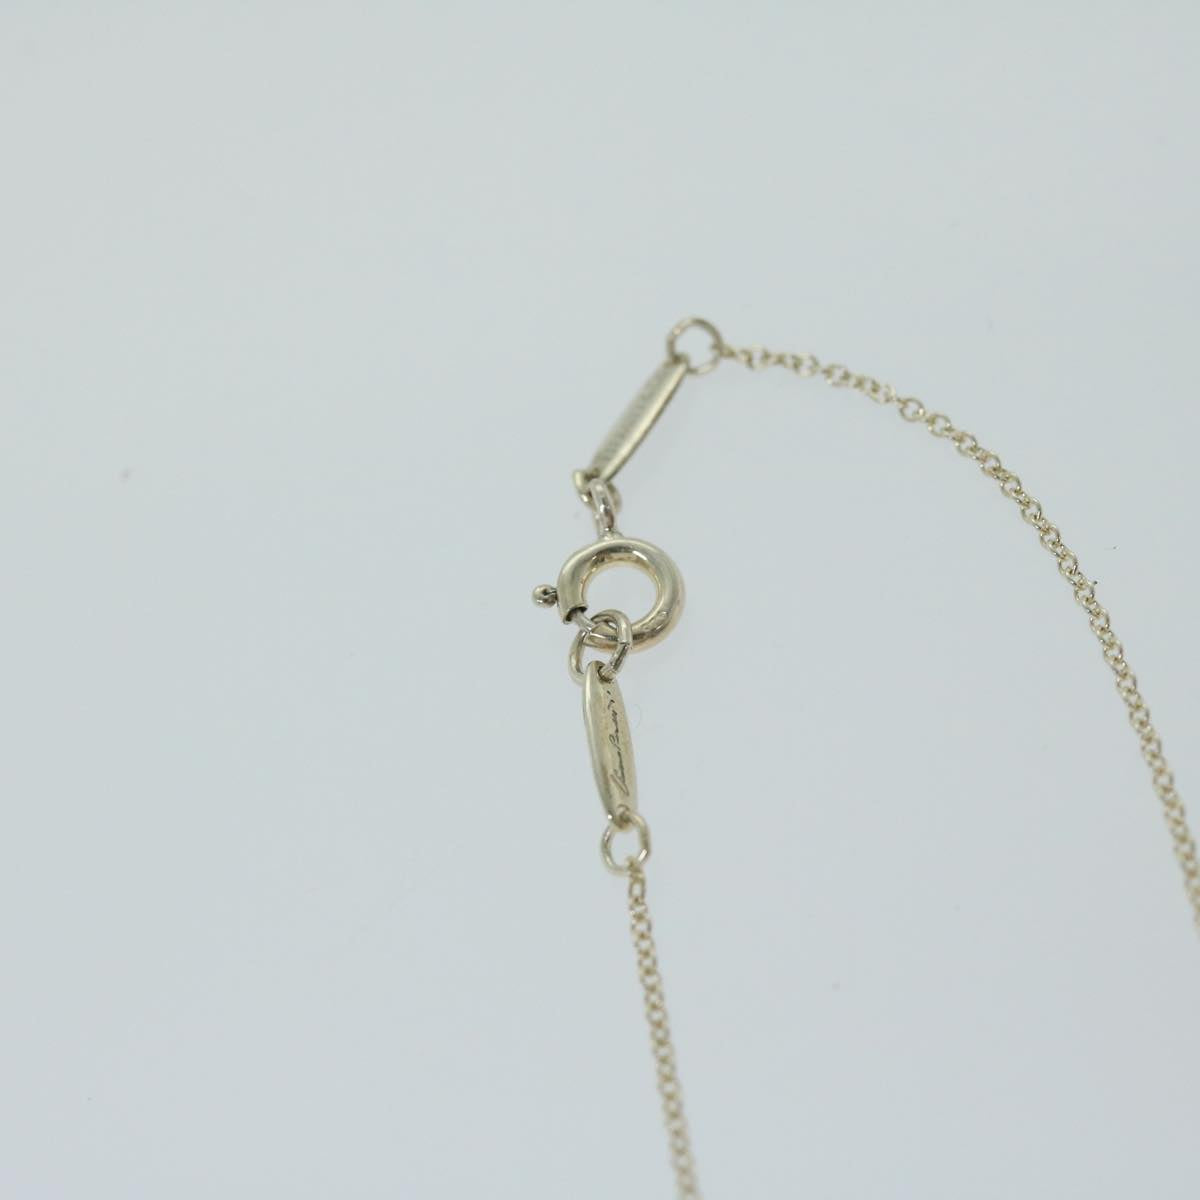 TIFFANY&Co. Necklace Ag925 Silver Auth am5920